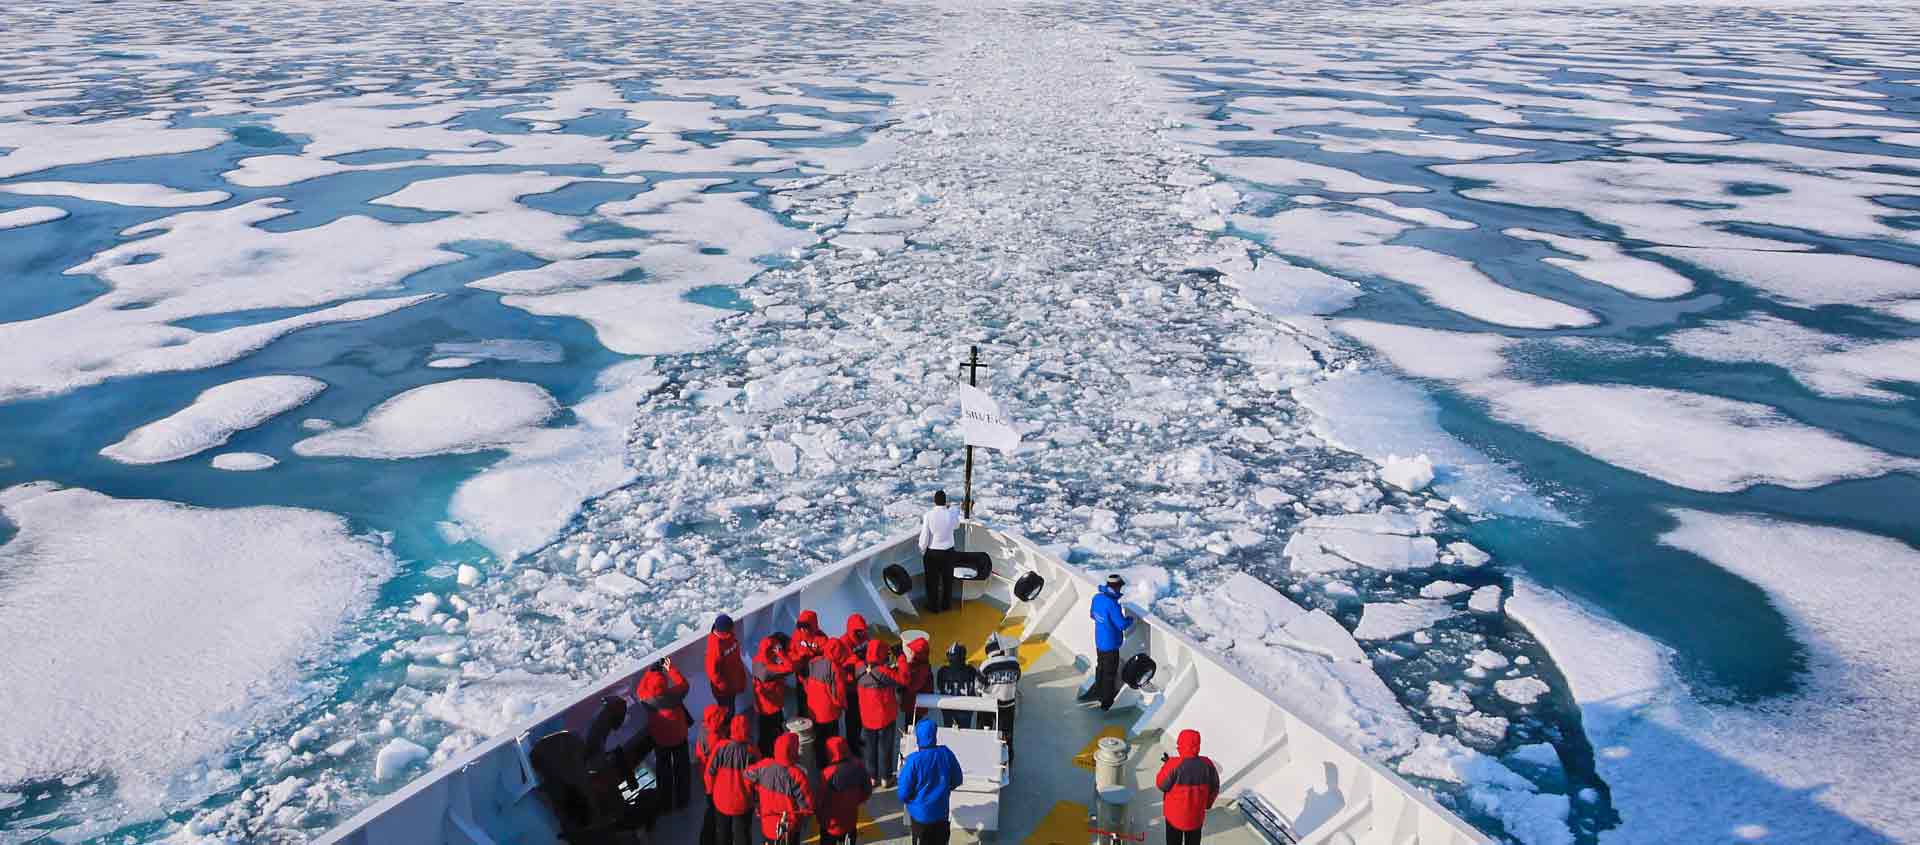 Northwest passage cruise of vessel bow in ice field